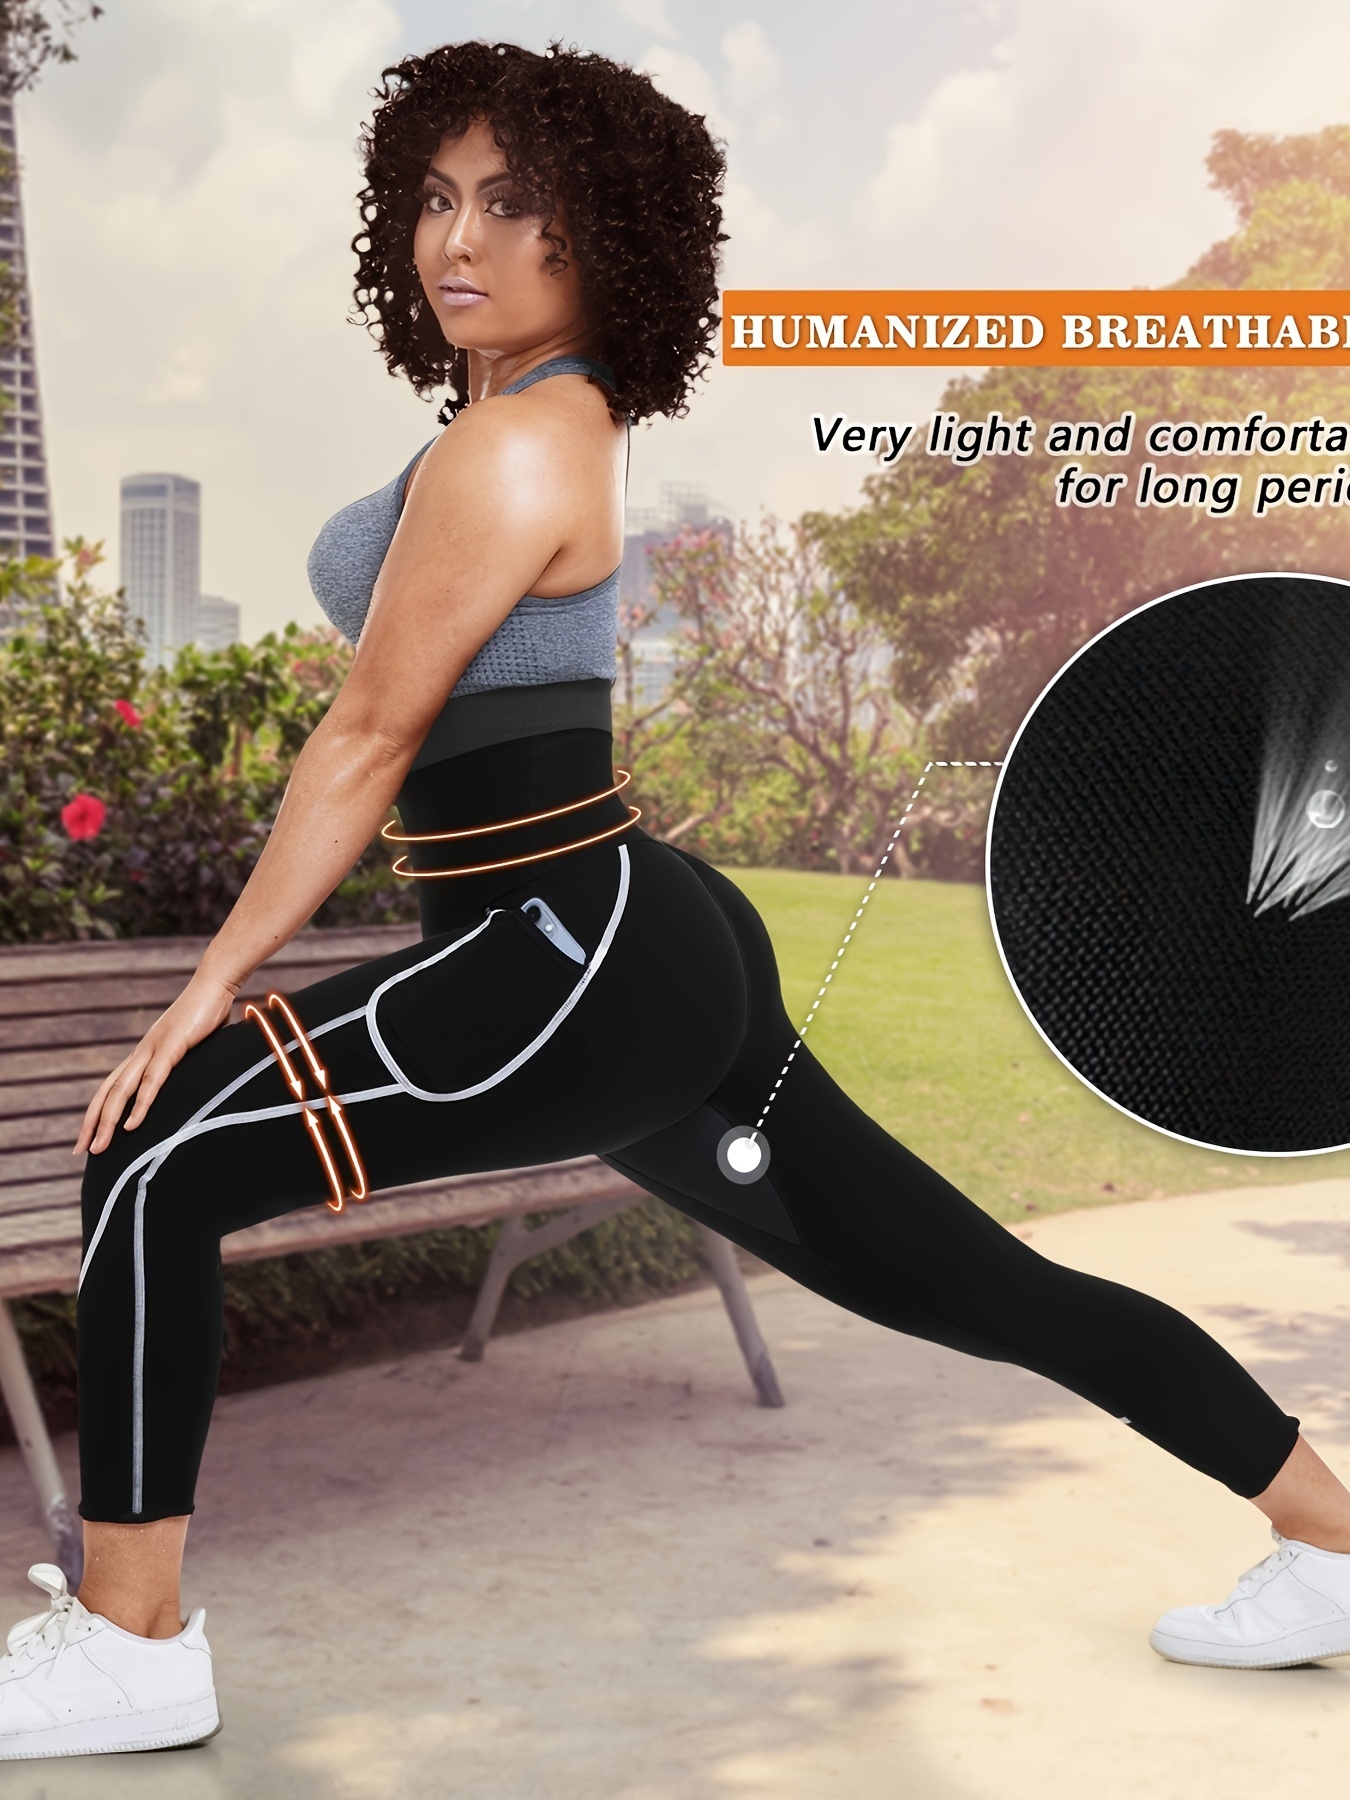 Details of Women's Sauna Slimming Pants Gym Workout Hot Thermo